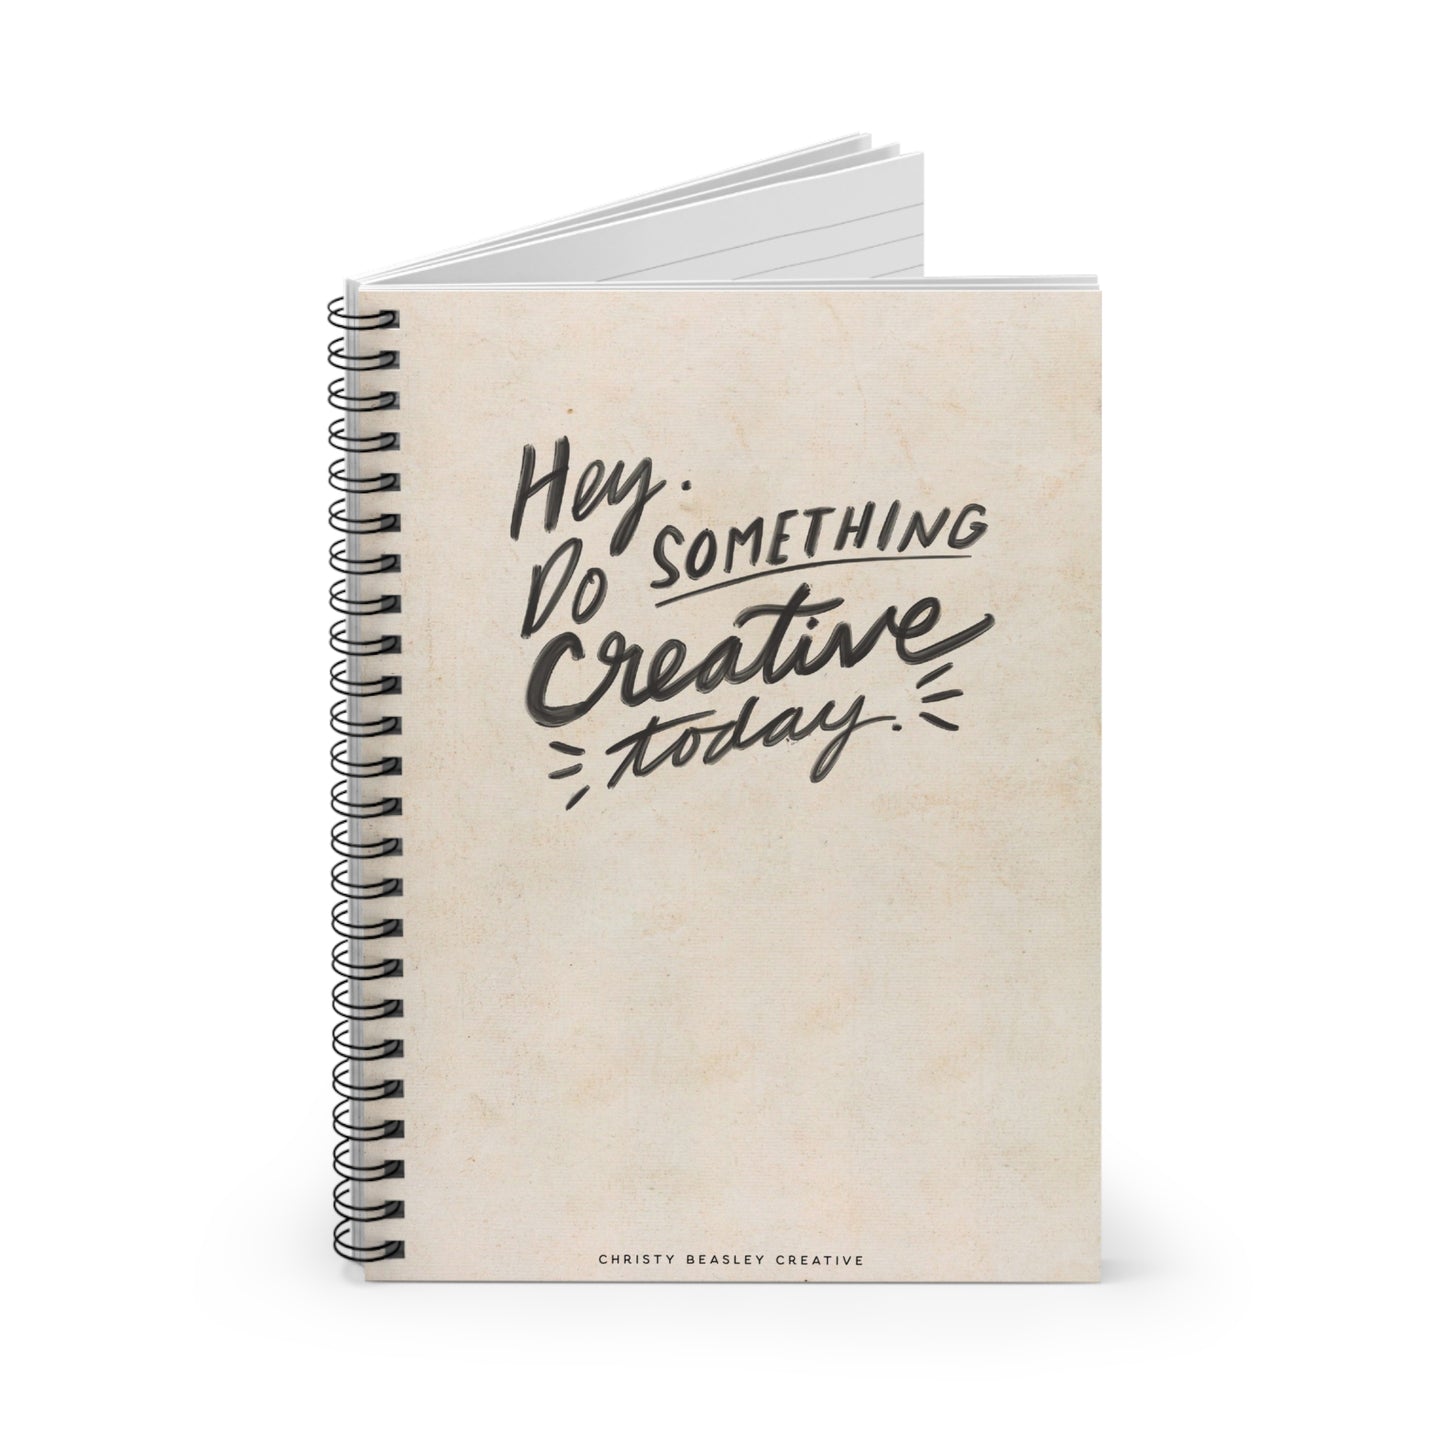 “Creative” Spiral Notebook - Ruled Line - by Christy Beasley